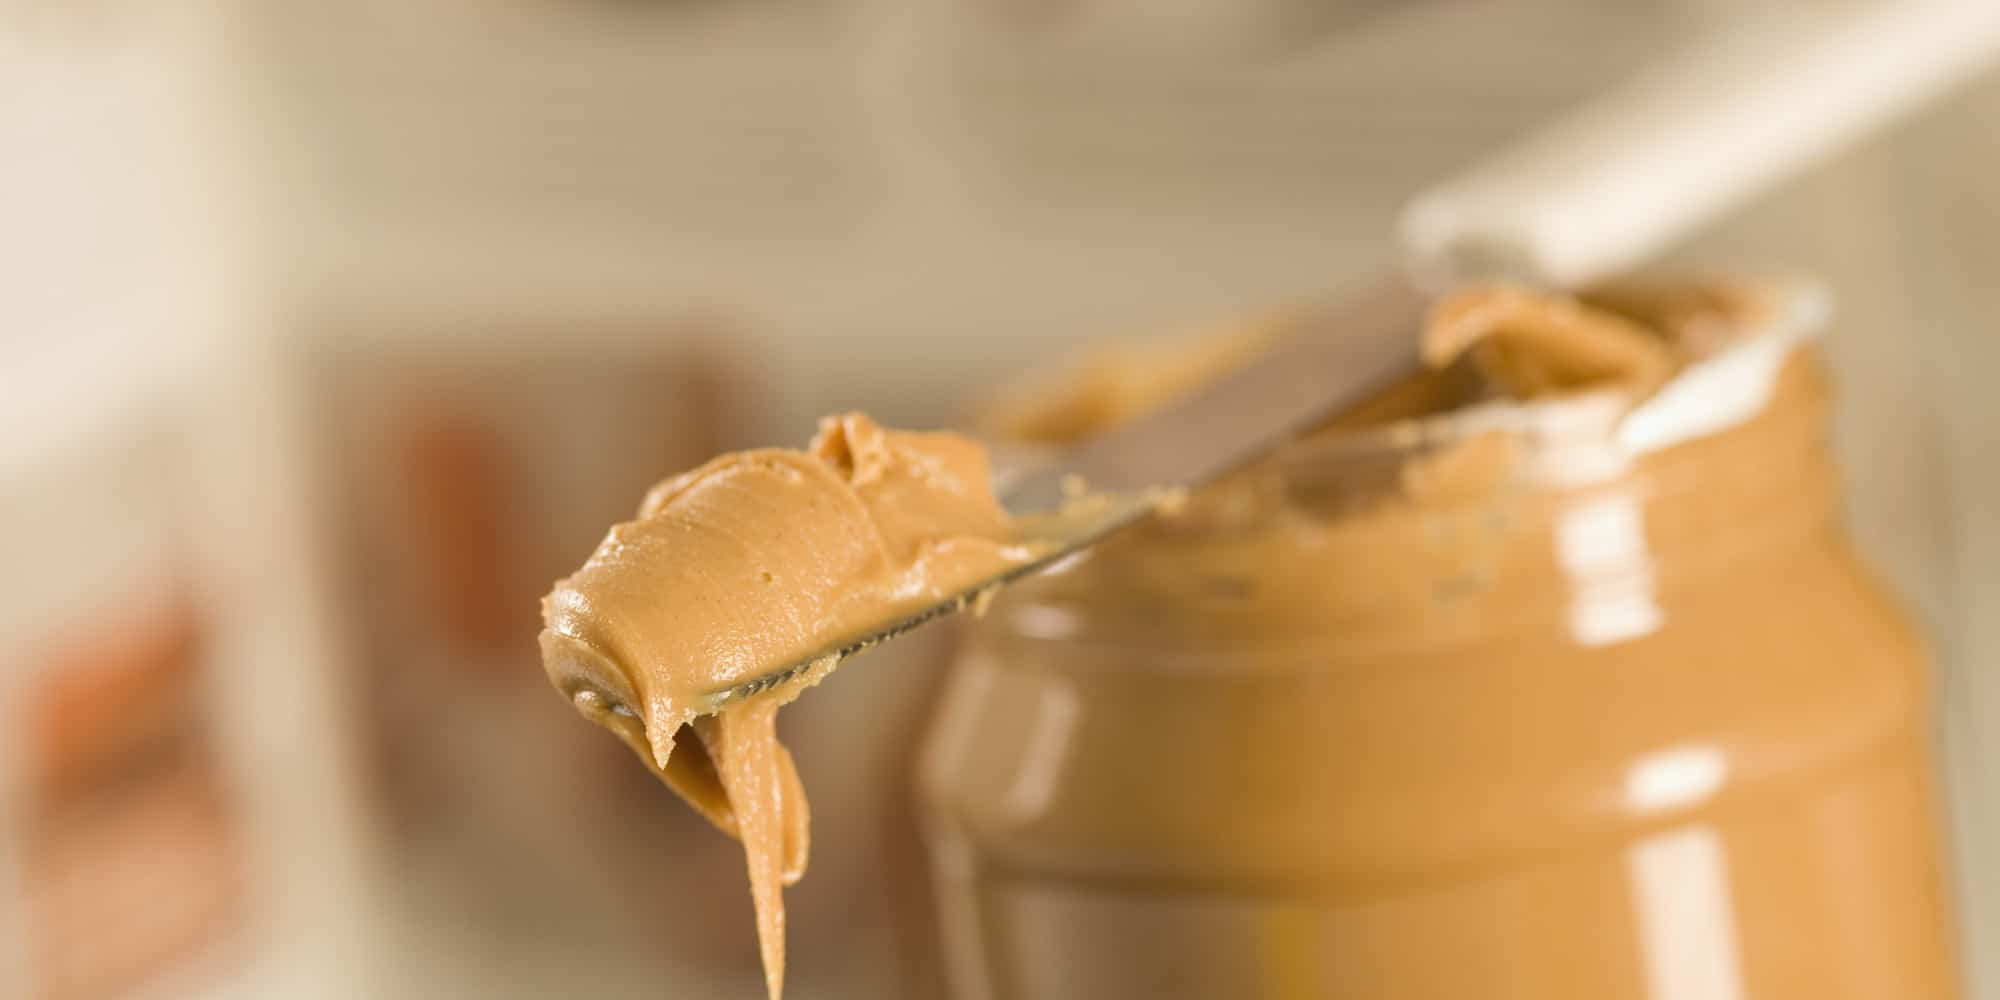 Use peanut butter as a smooth shaving cream